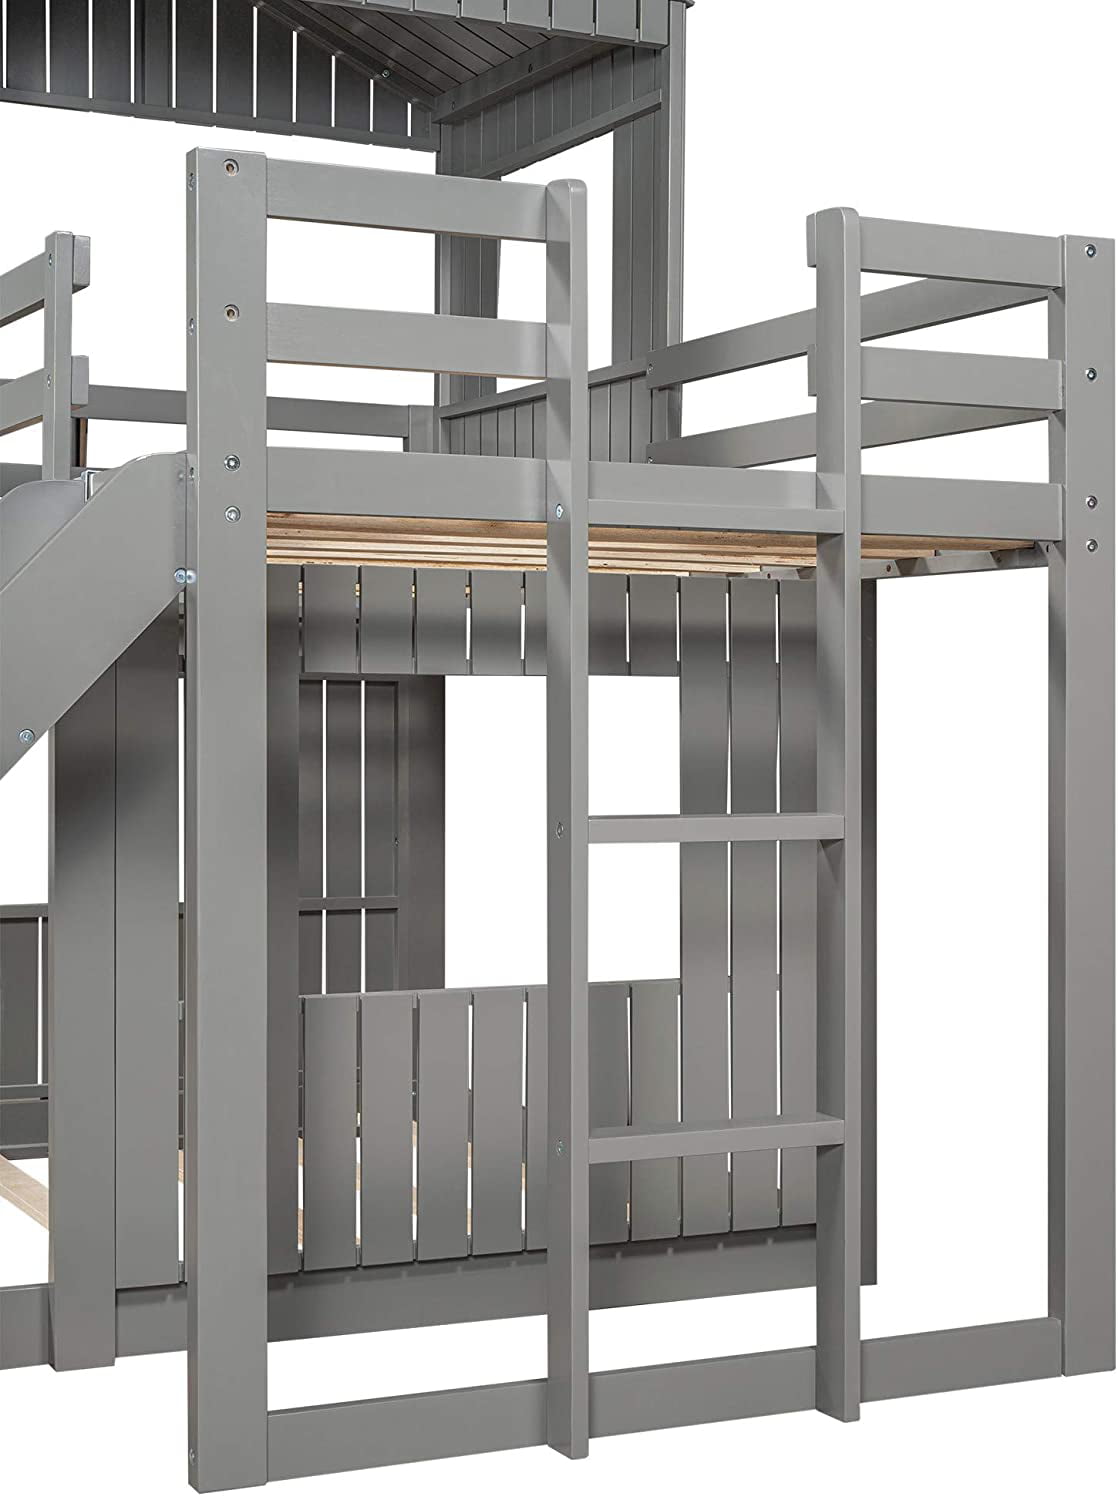 Churanty Pine Wood Bunk Bed Security, Twin-over-full, Gray